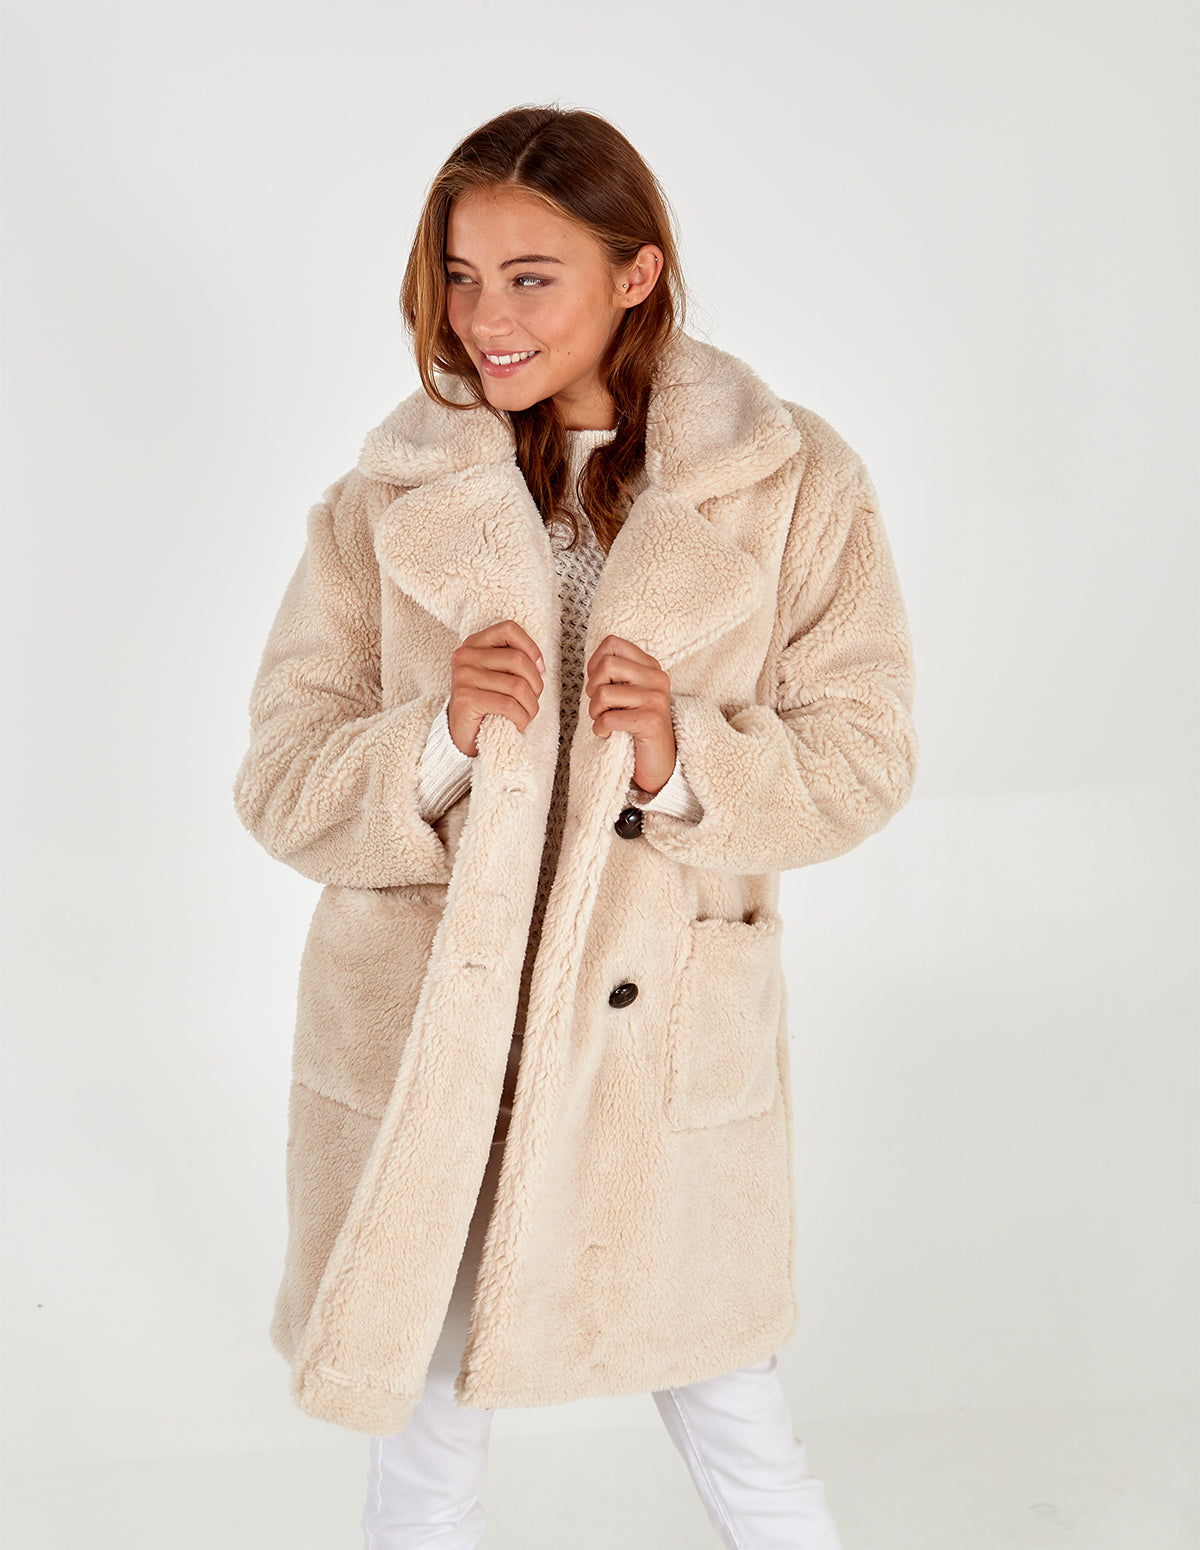 TILLY -  Cream Drop Shoulder Double Breasted Teddy Coat - 14 / stone